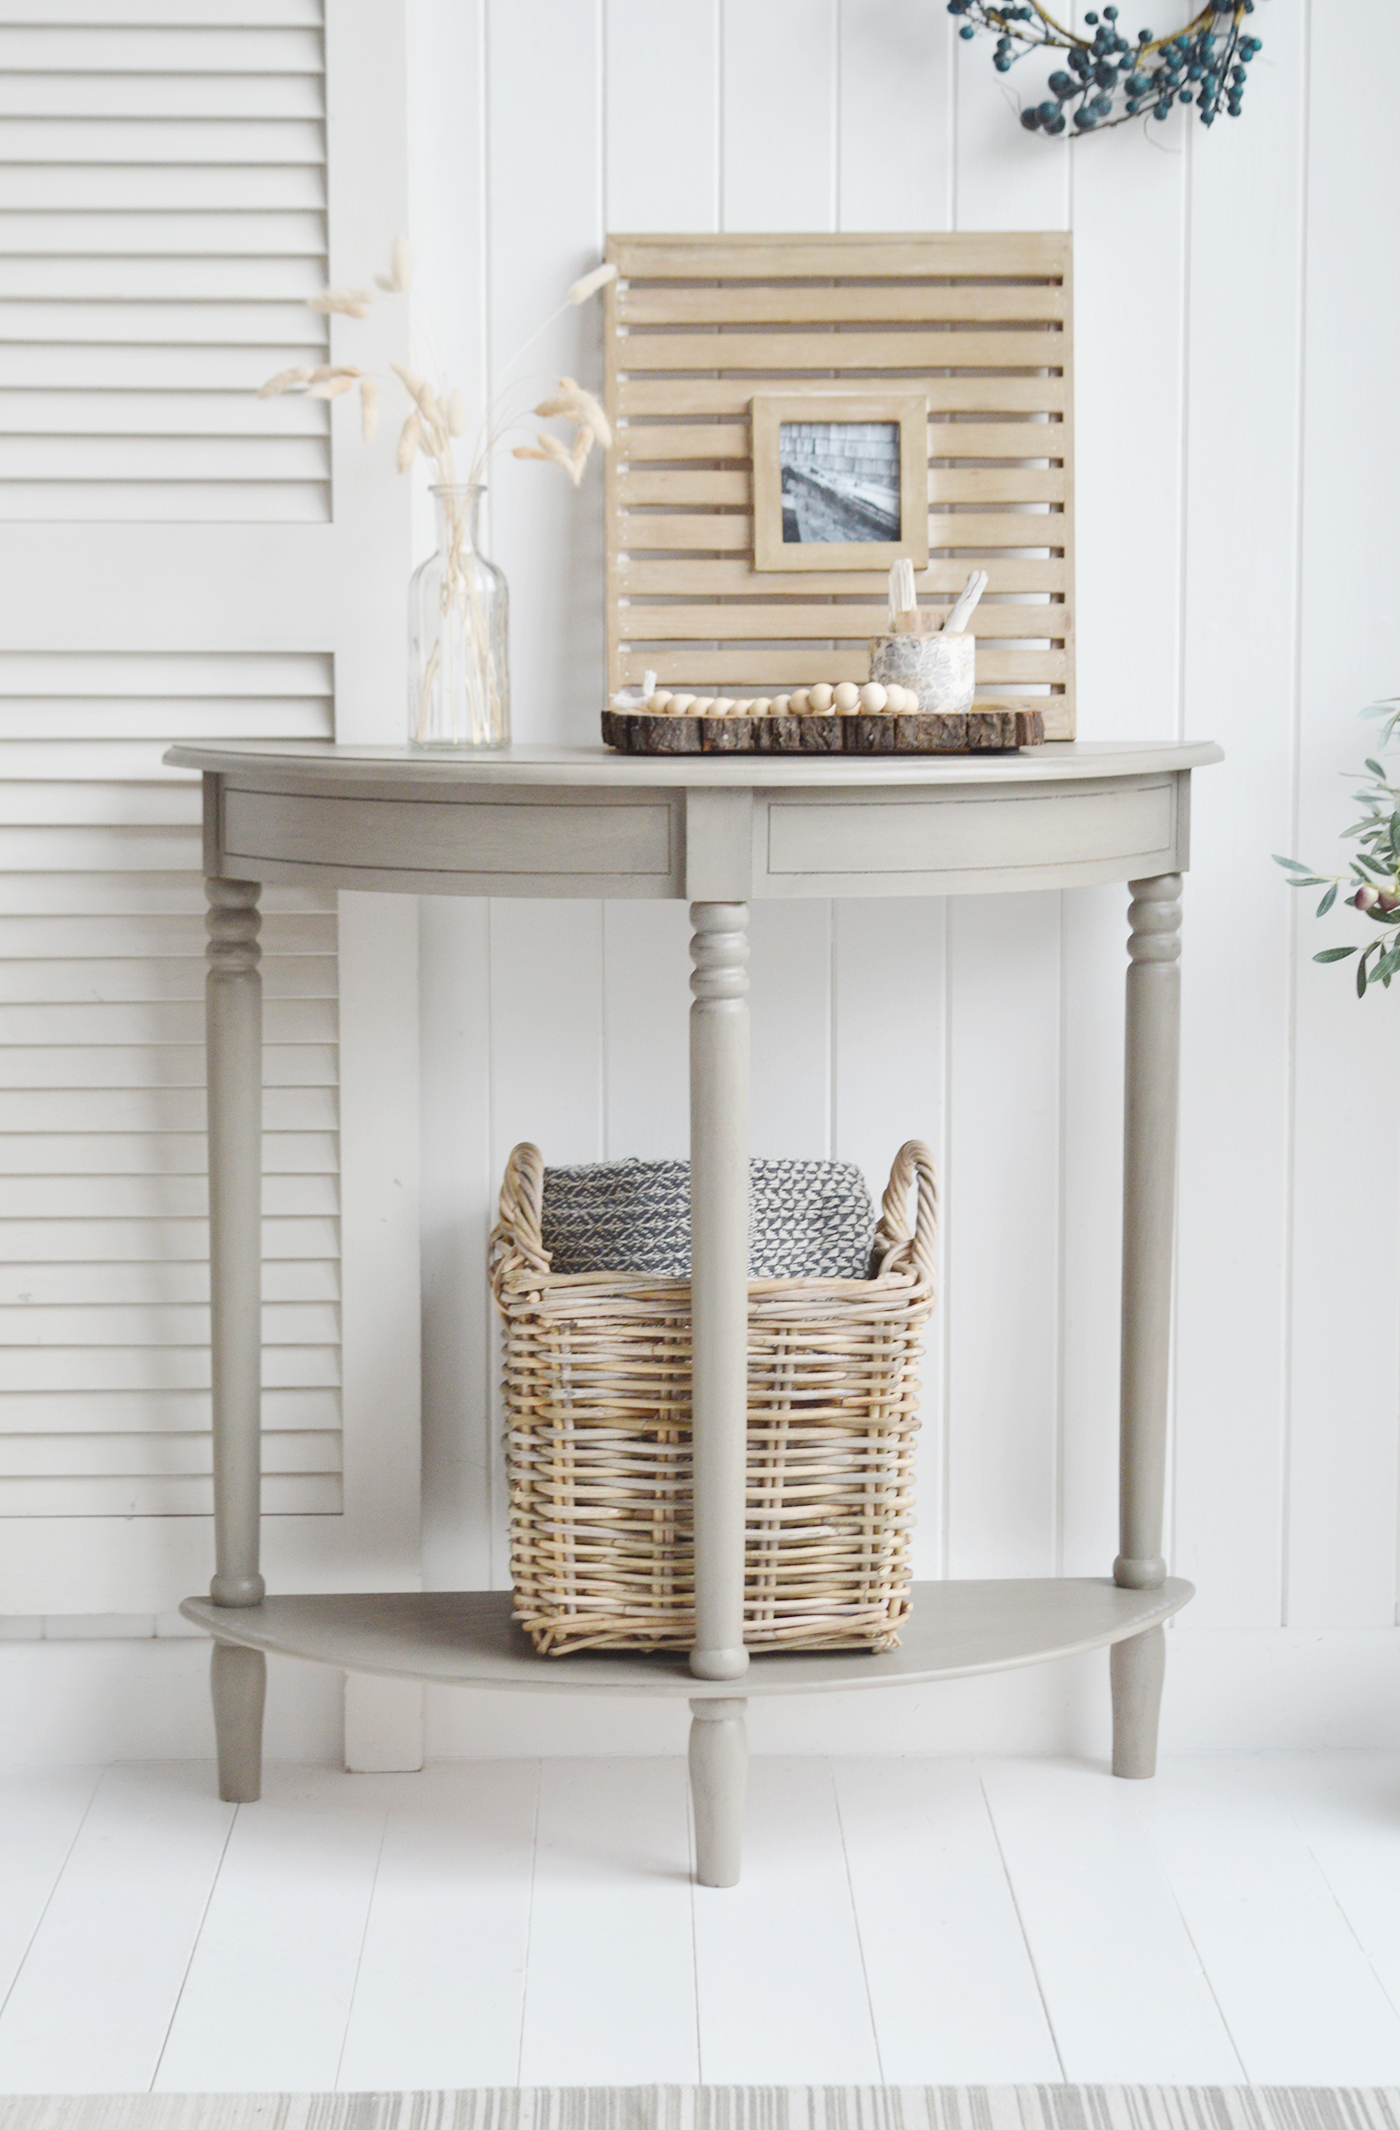 Newport French Grey narrow hall console table 30cm with a shelf. Suitable furniture for all New England country, coastal, modern farmhouse and Hamptons styled homes from The White Lighthouse